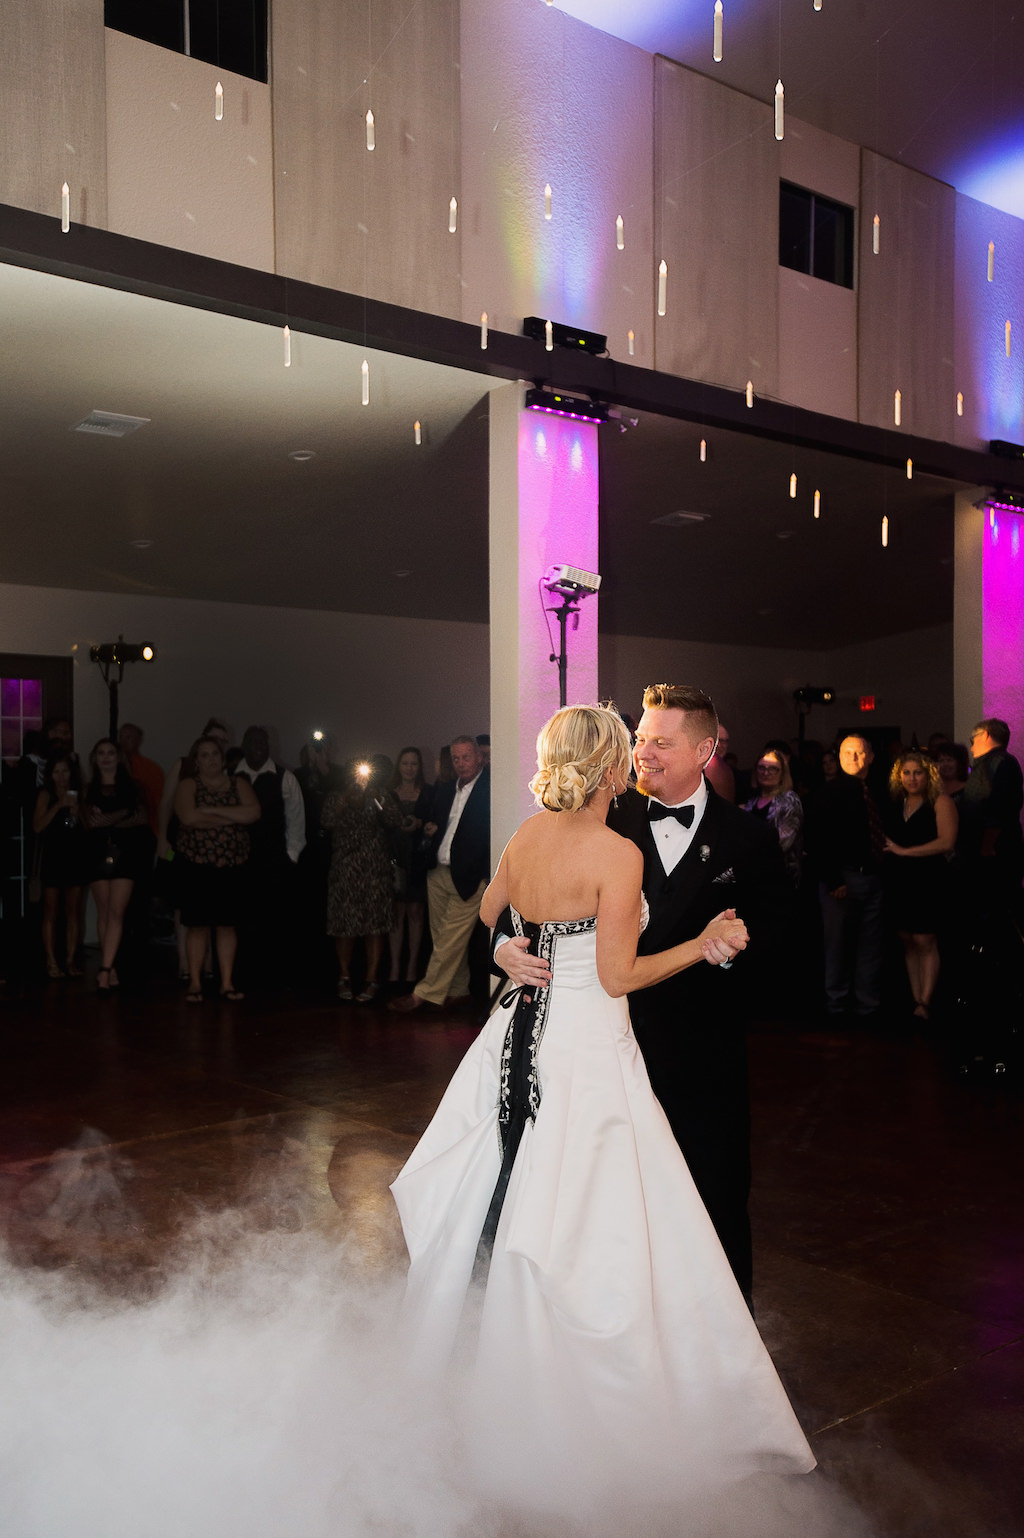 First Dance Portrait, Bride wearing Black and White A Line Strapless Wedding Dress | Sarasota Halloween Themed Wedding Smoke Fog by Nature Coast Entertainment Services